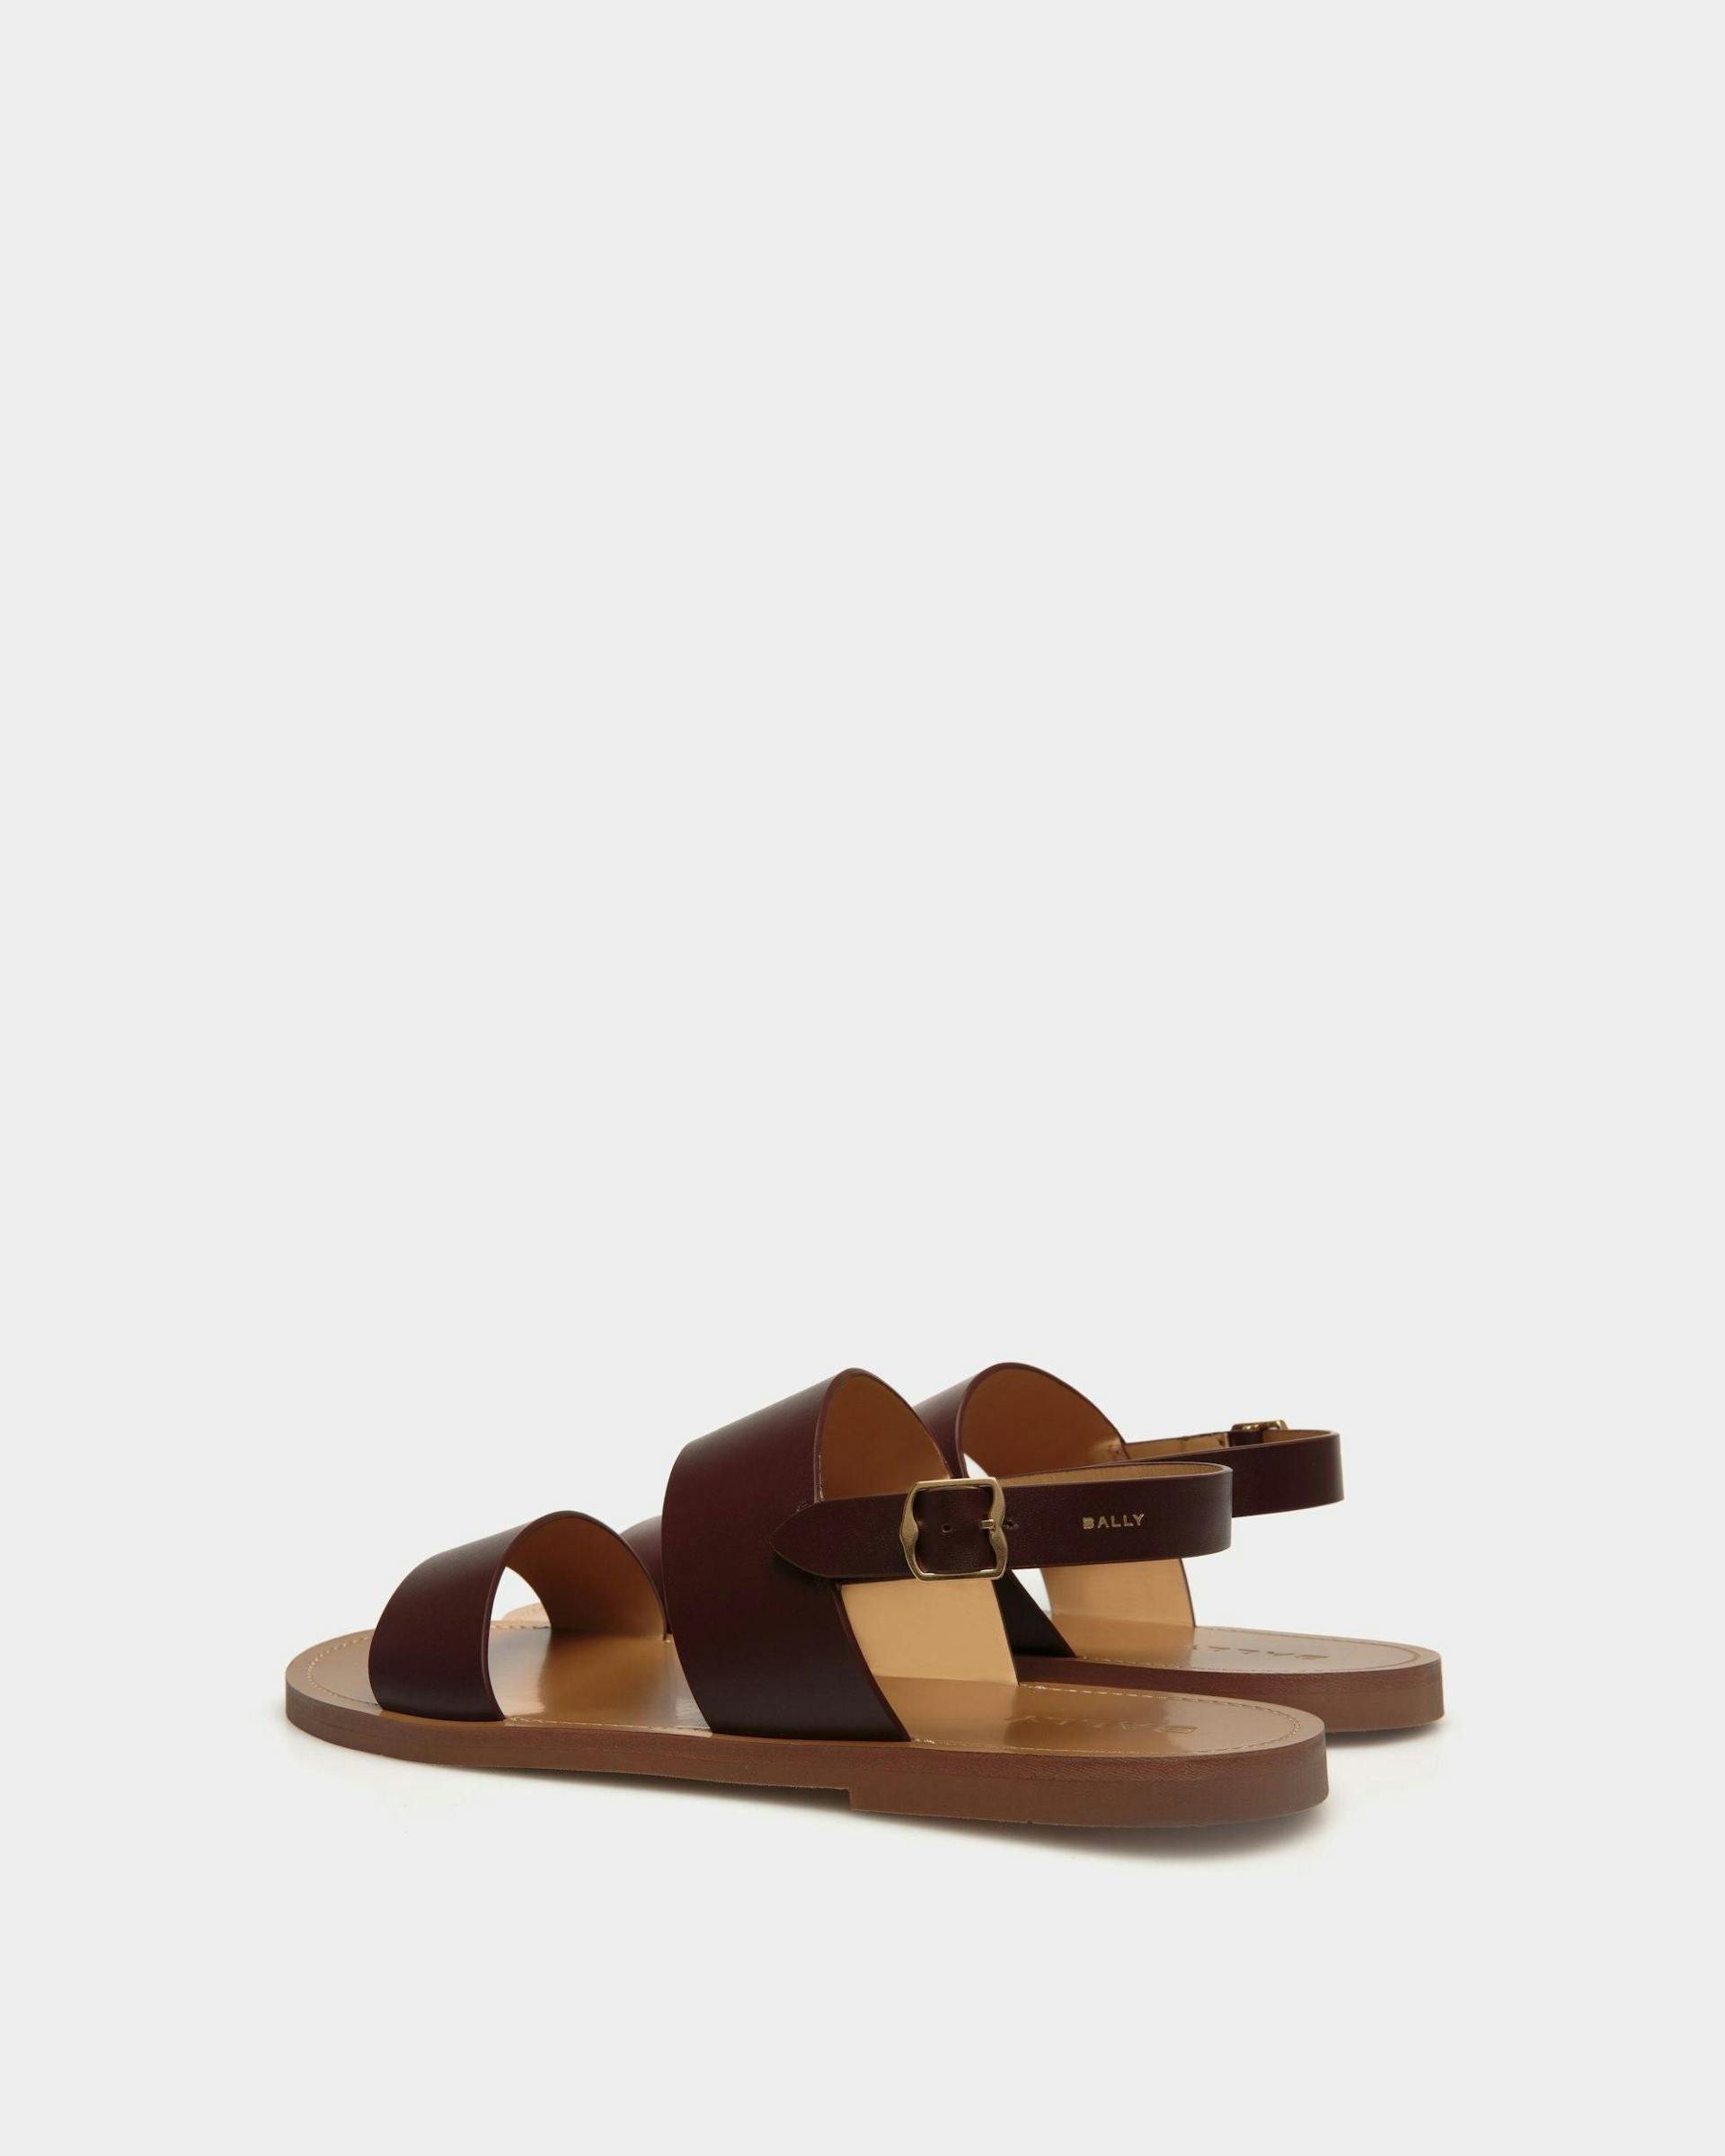 Men's Chateau Sandal in Chestnut Brown Leather | Bally | Still Life 3/4 Back